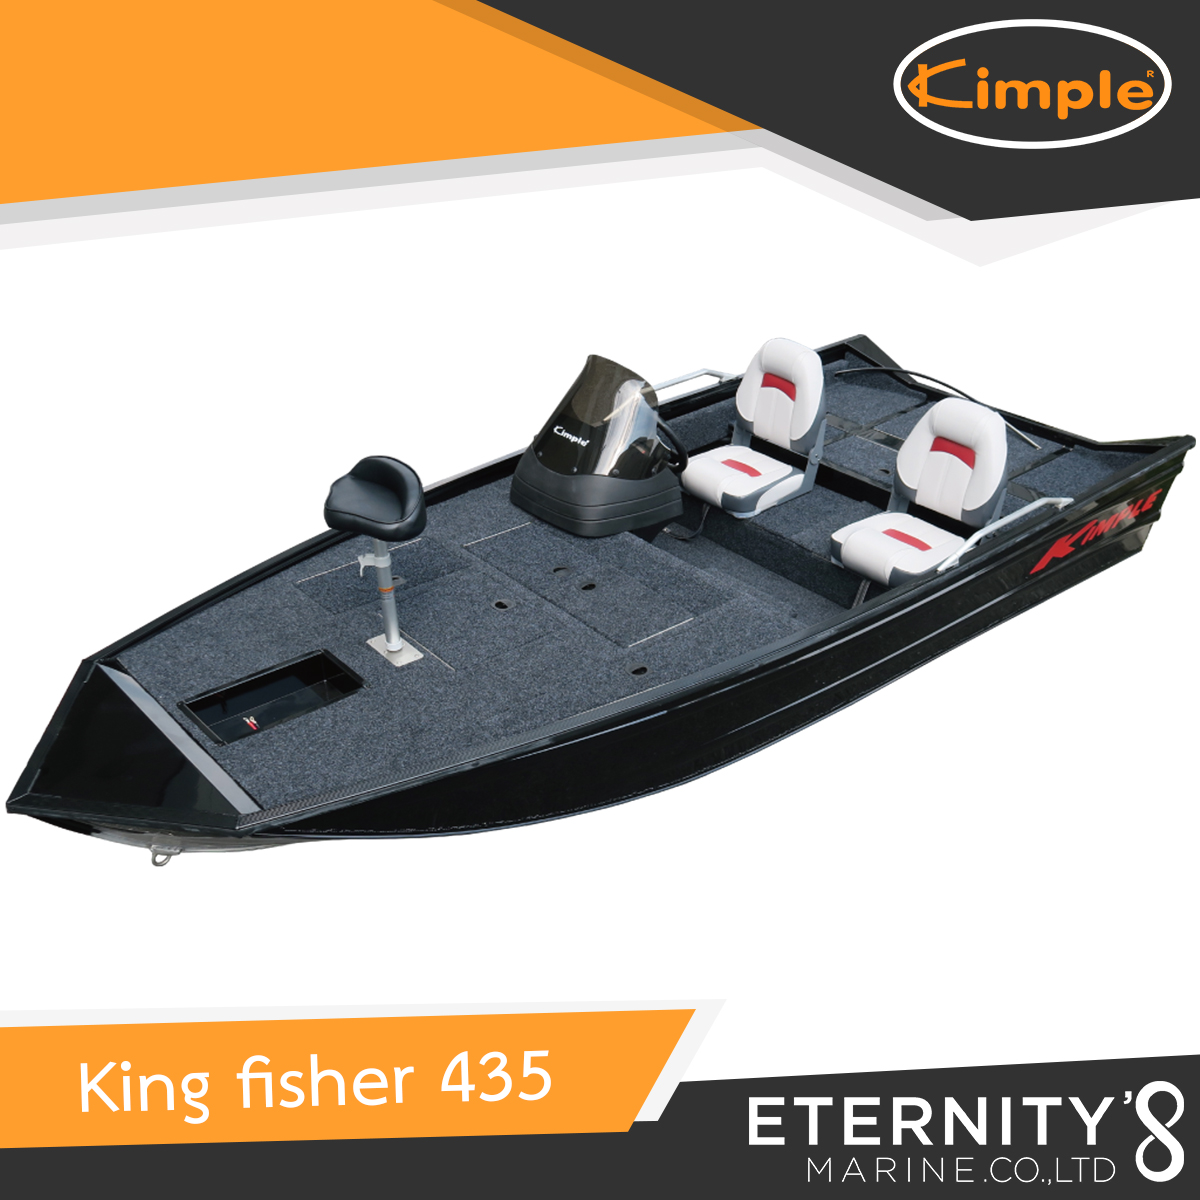 Kimple King fisher 435